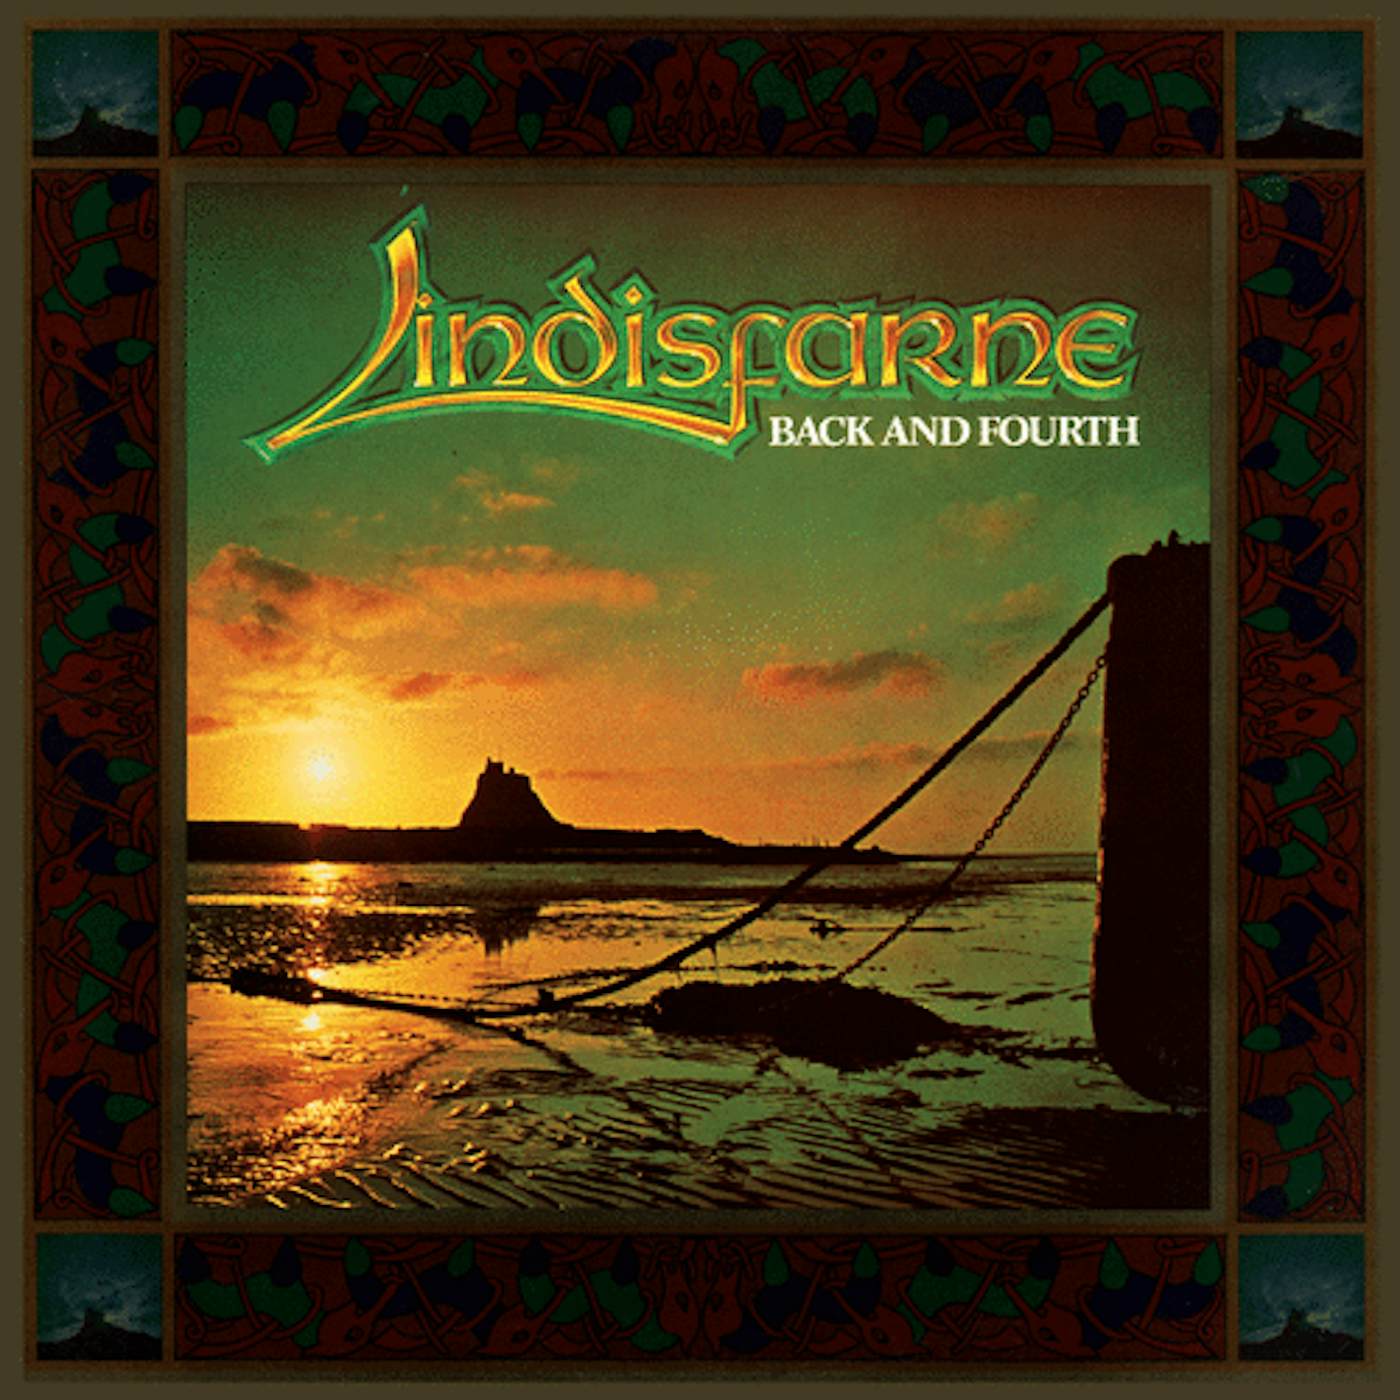 Lindisfarne Back And Fourth Vinyl Record